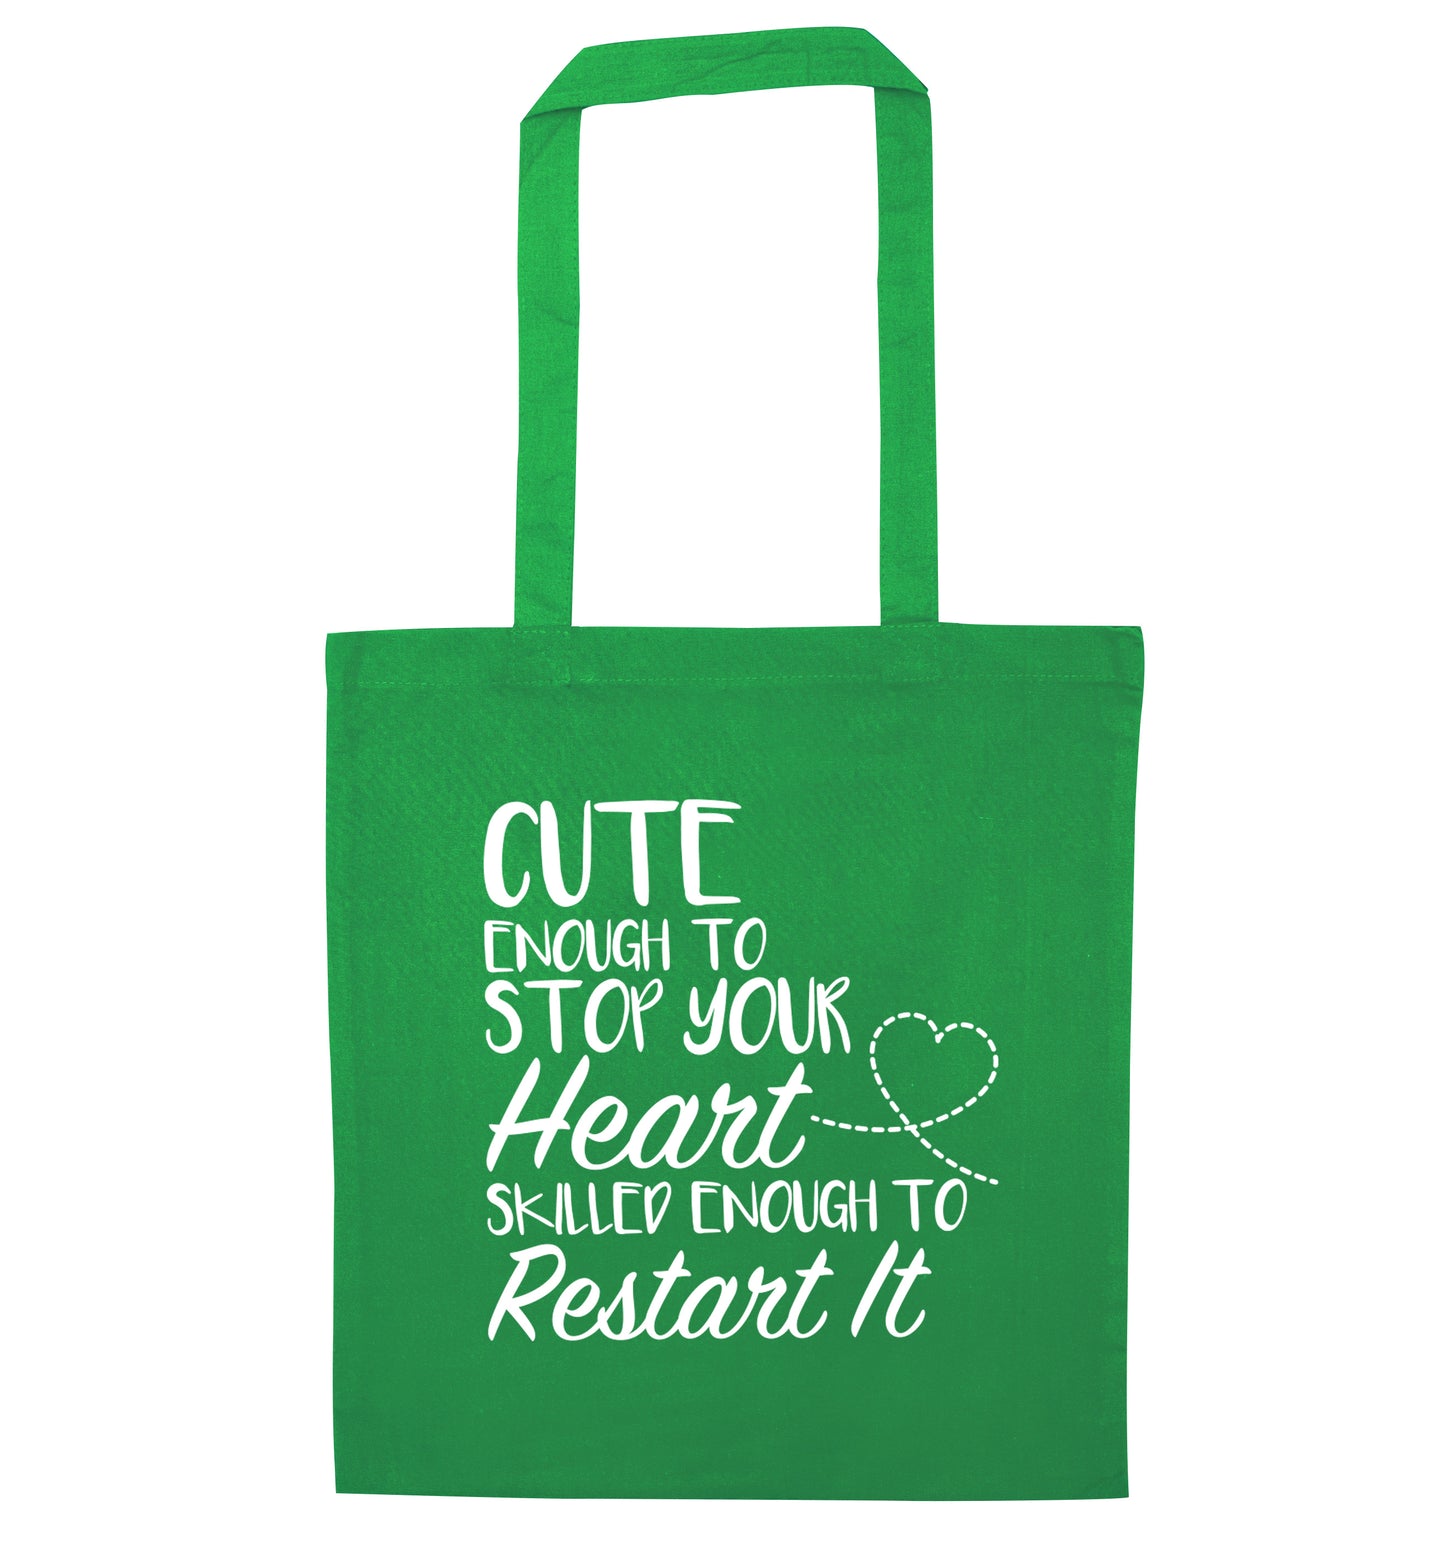 Cute enough to stop your heart skilled enough to restart it green tote bag